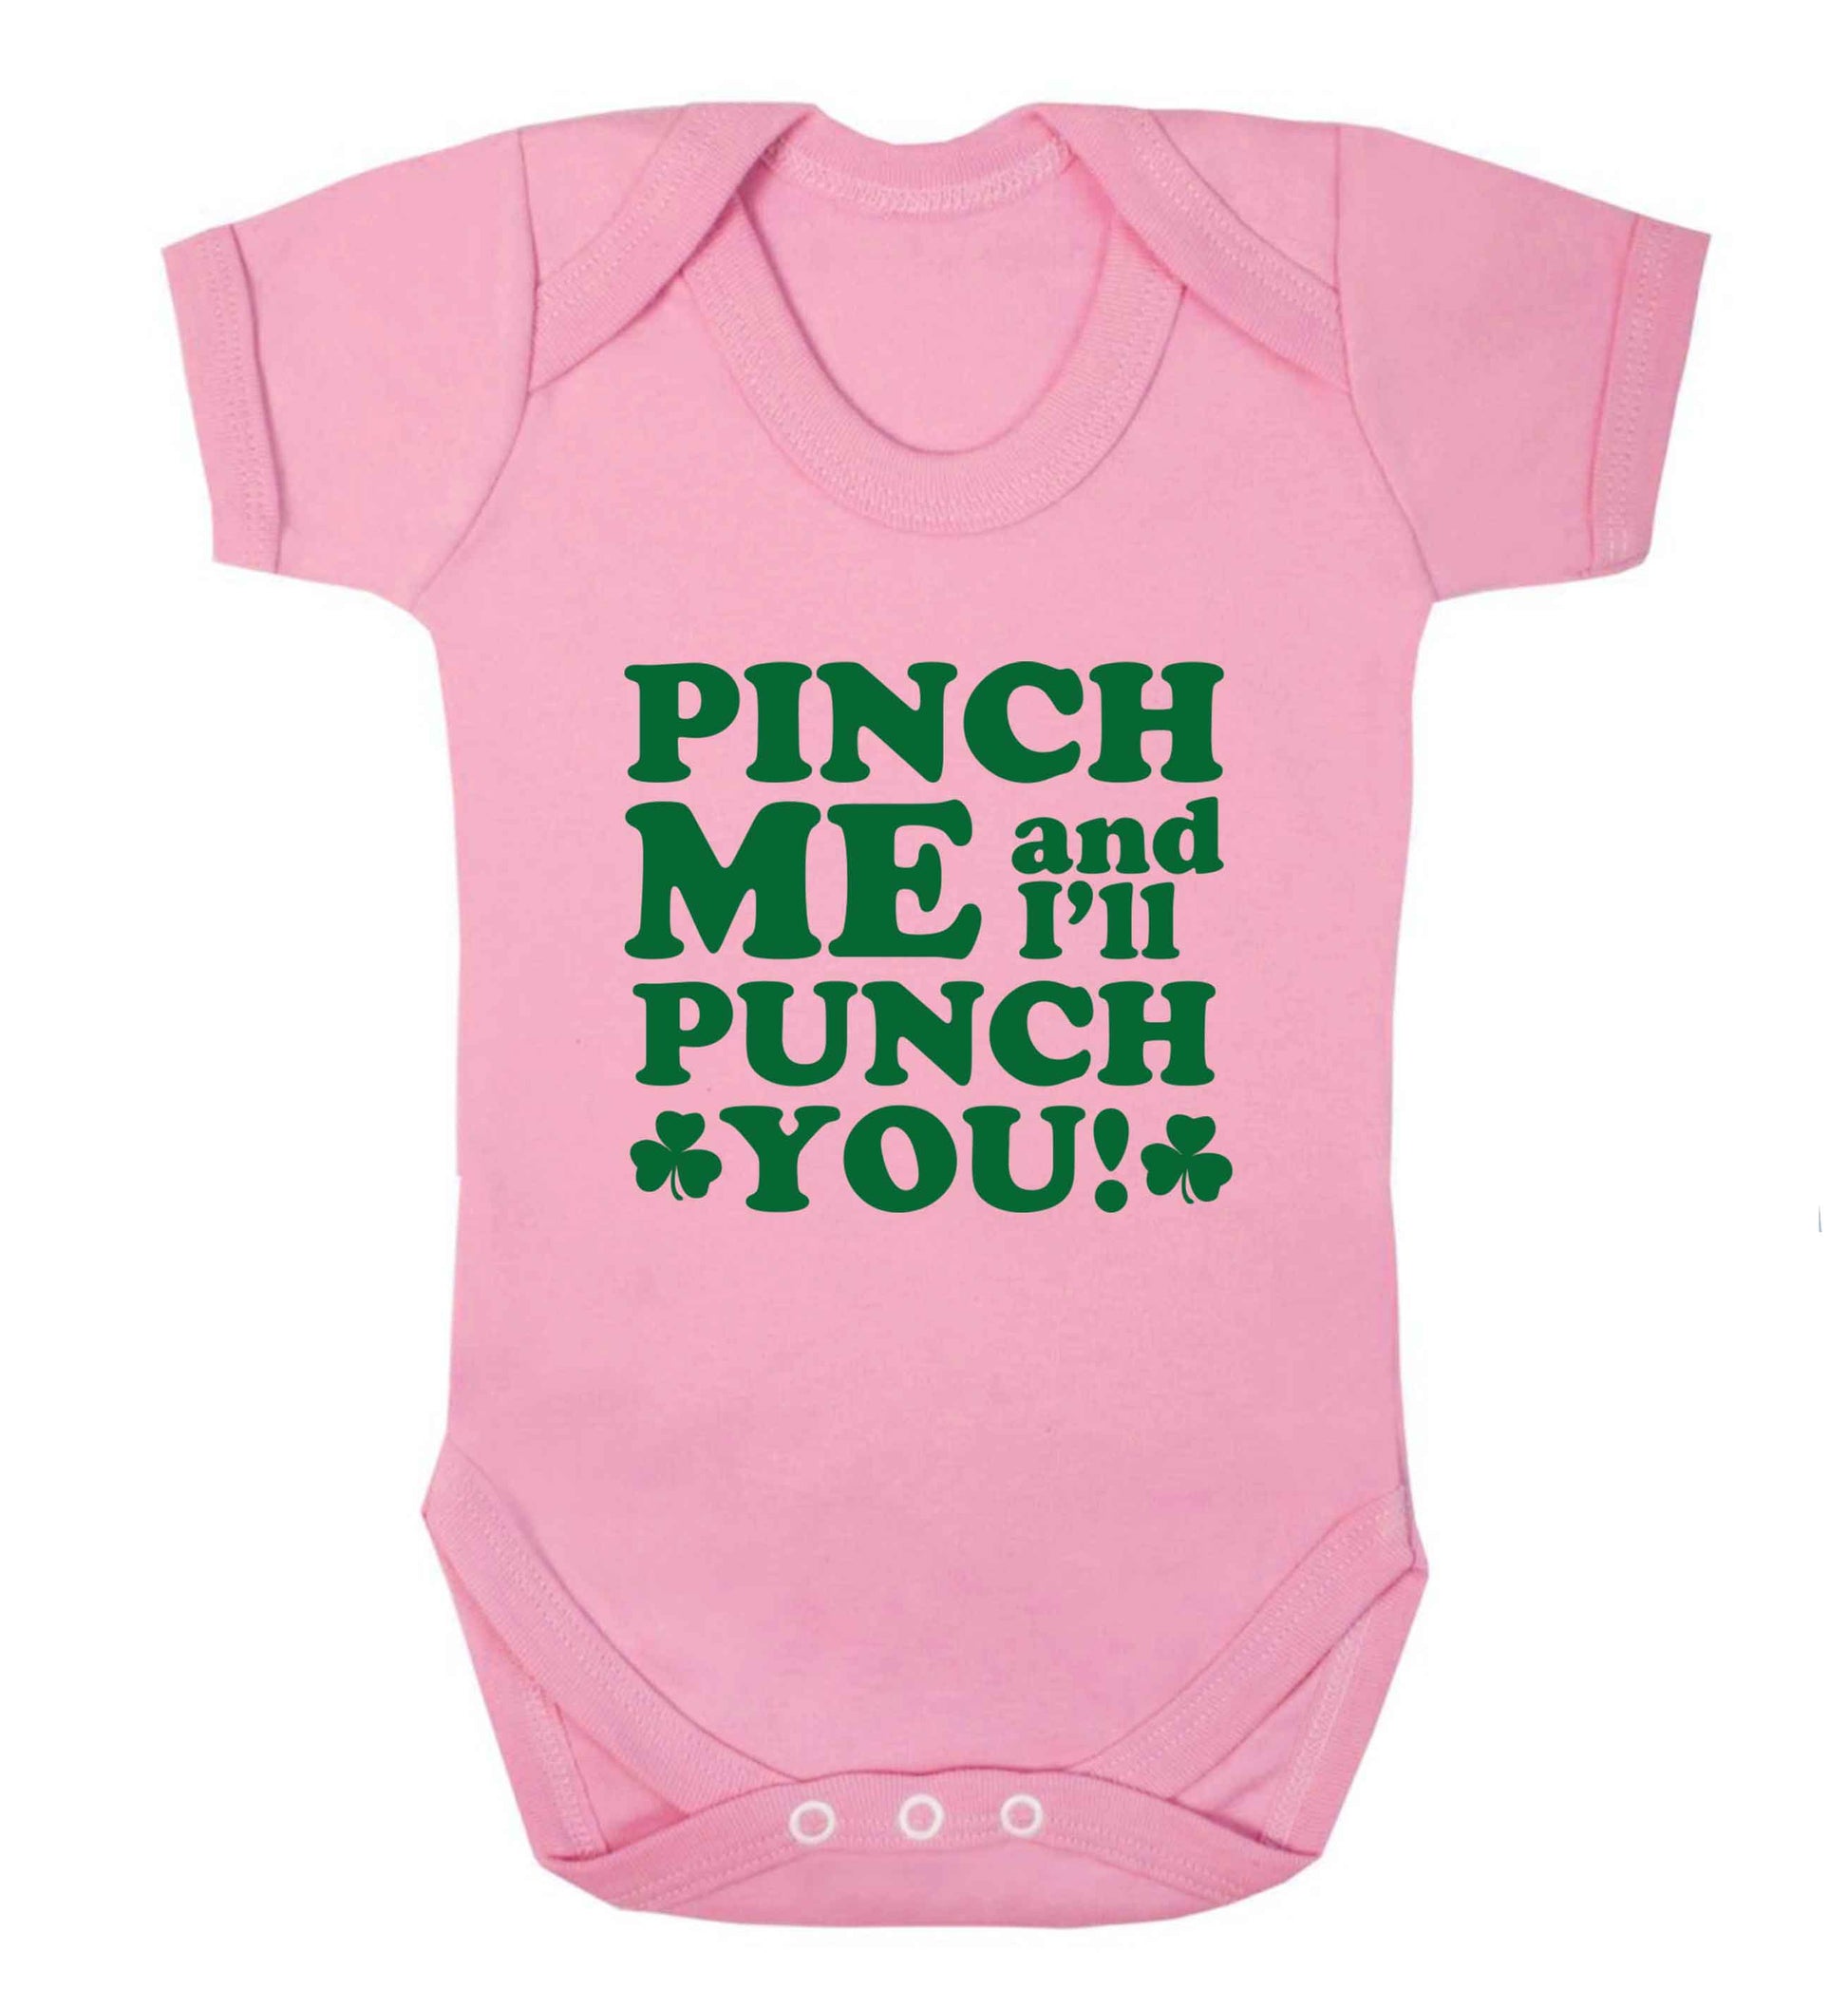 Pinch me and I'll punch you baby vest pale pink 18-24 months